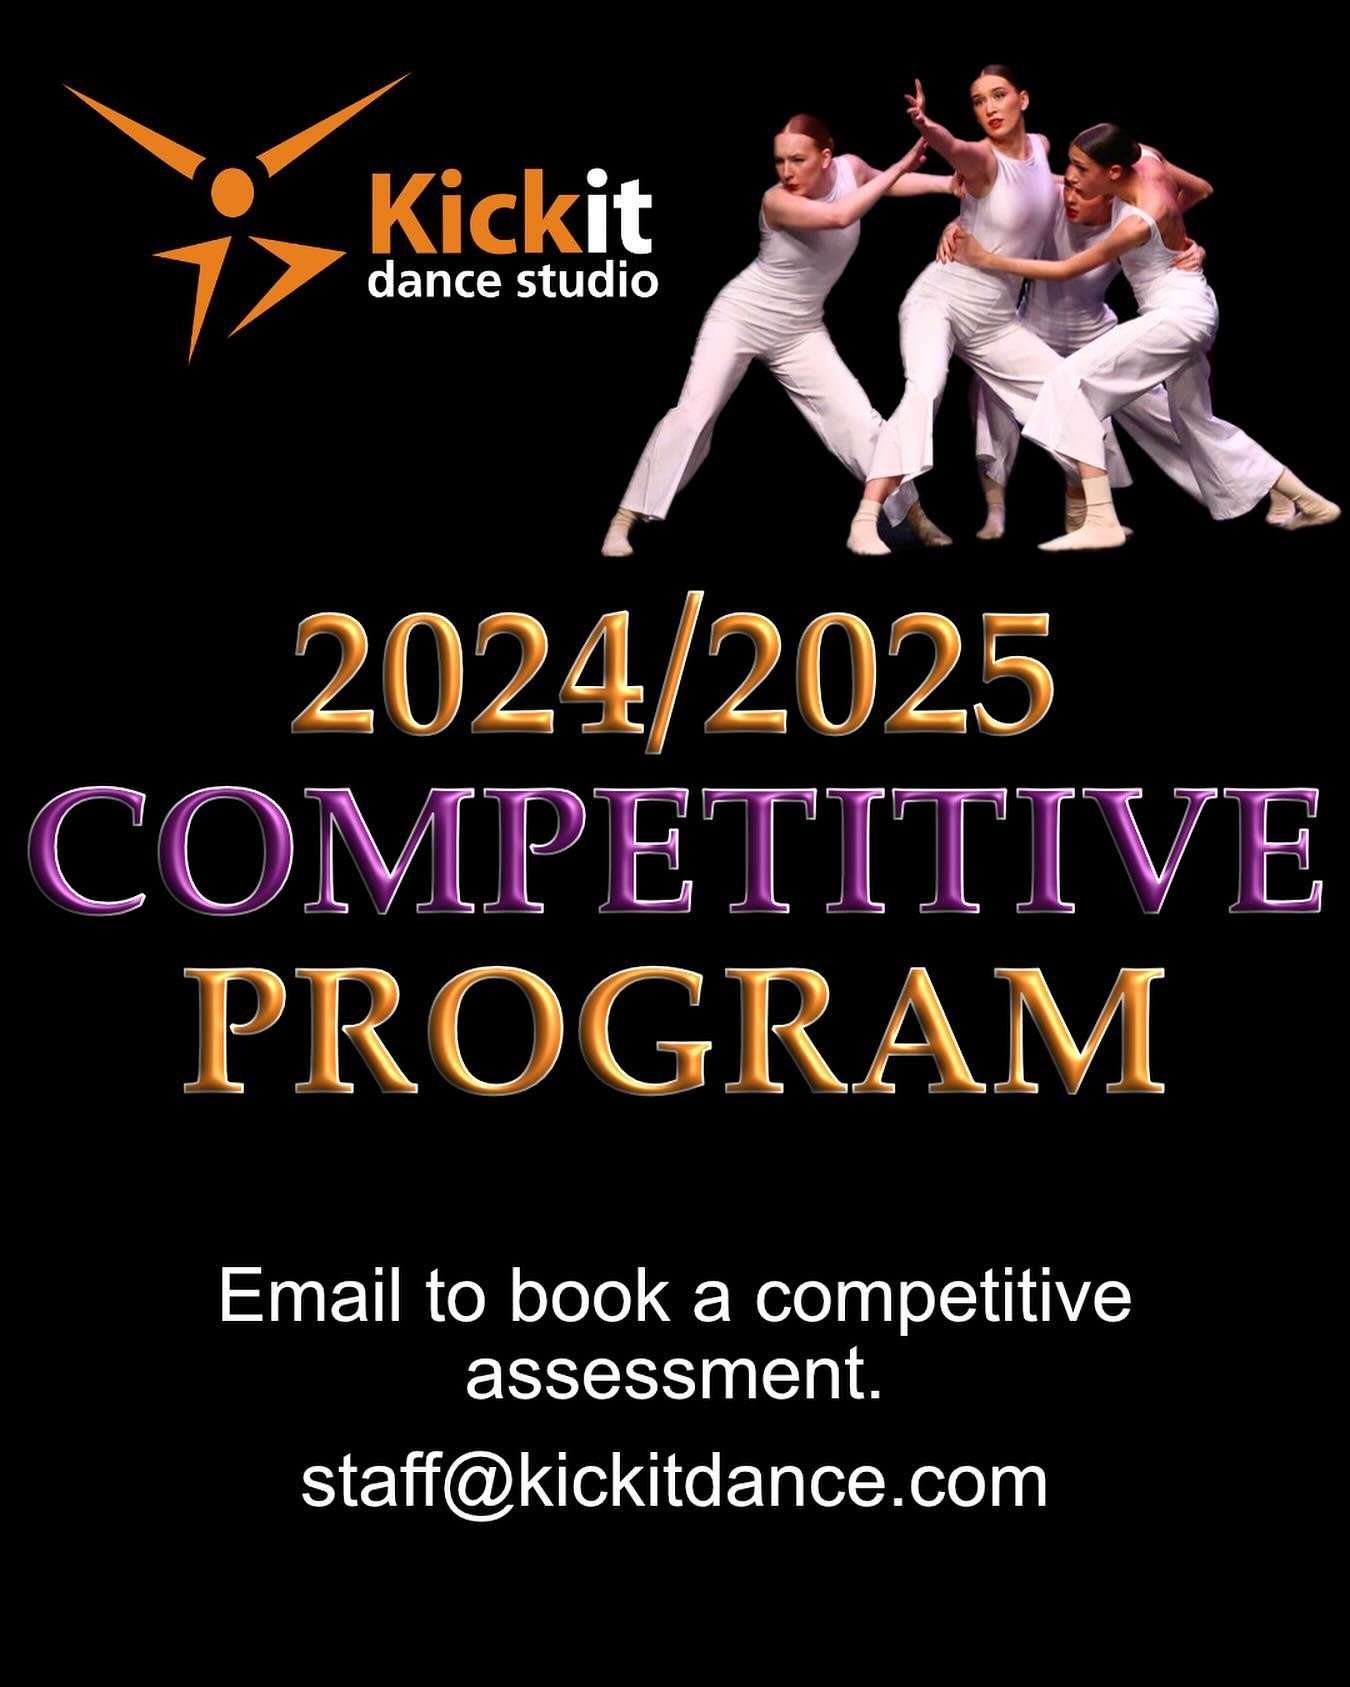 Come and join the team! 

Competitive classes for ages 7 &amp; up. 

Ballet &bull; Jazz &bull; Tap &bull; Hip Hop &bull; Lyrical &bull; Contemporary &bull; Musical Theatre &bull; Acro

New inquiries, please email staff@kickitdance.com to schedule an 